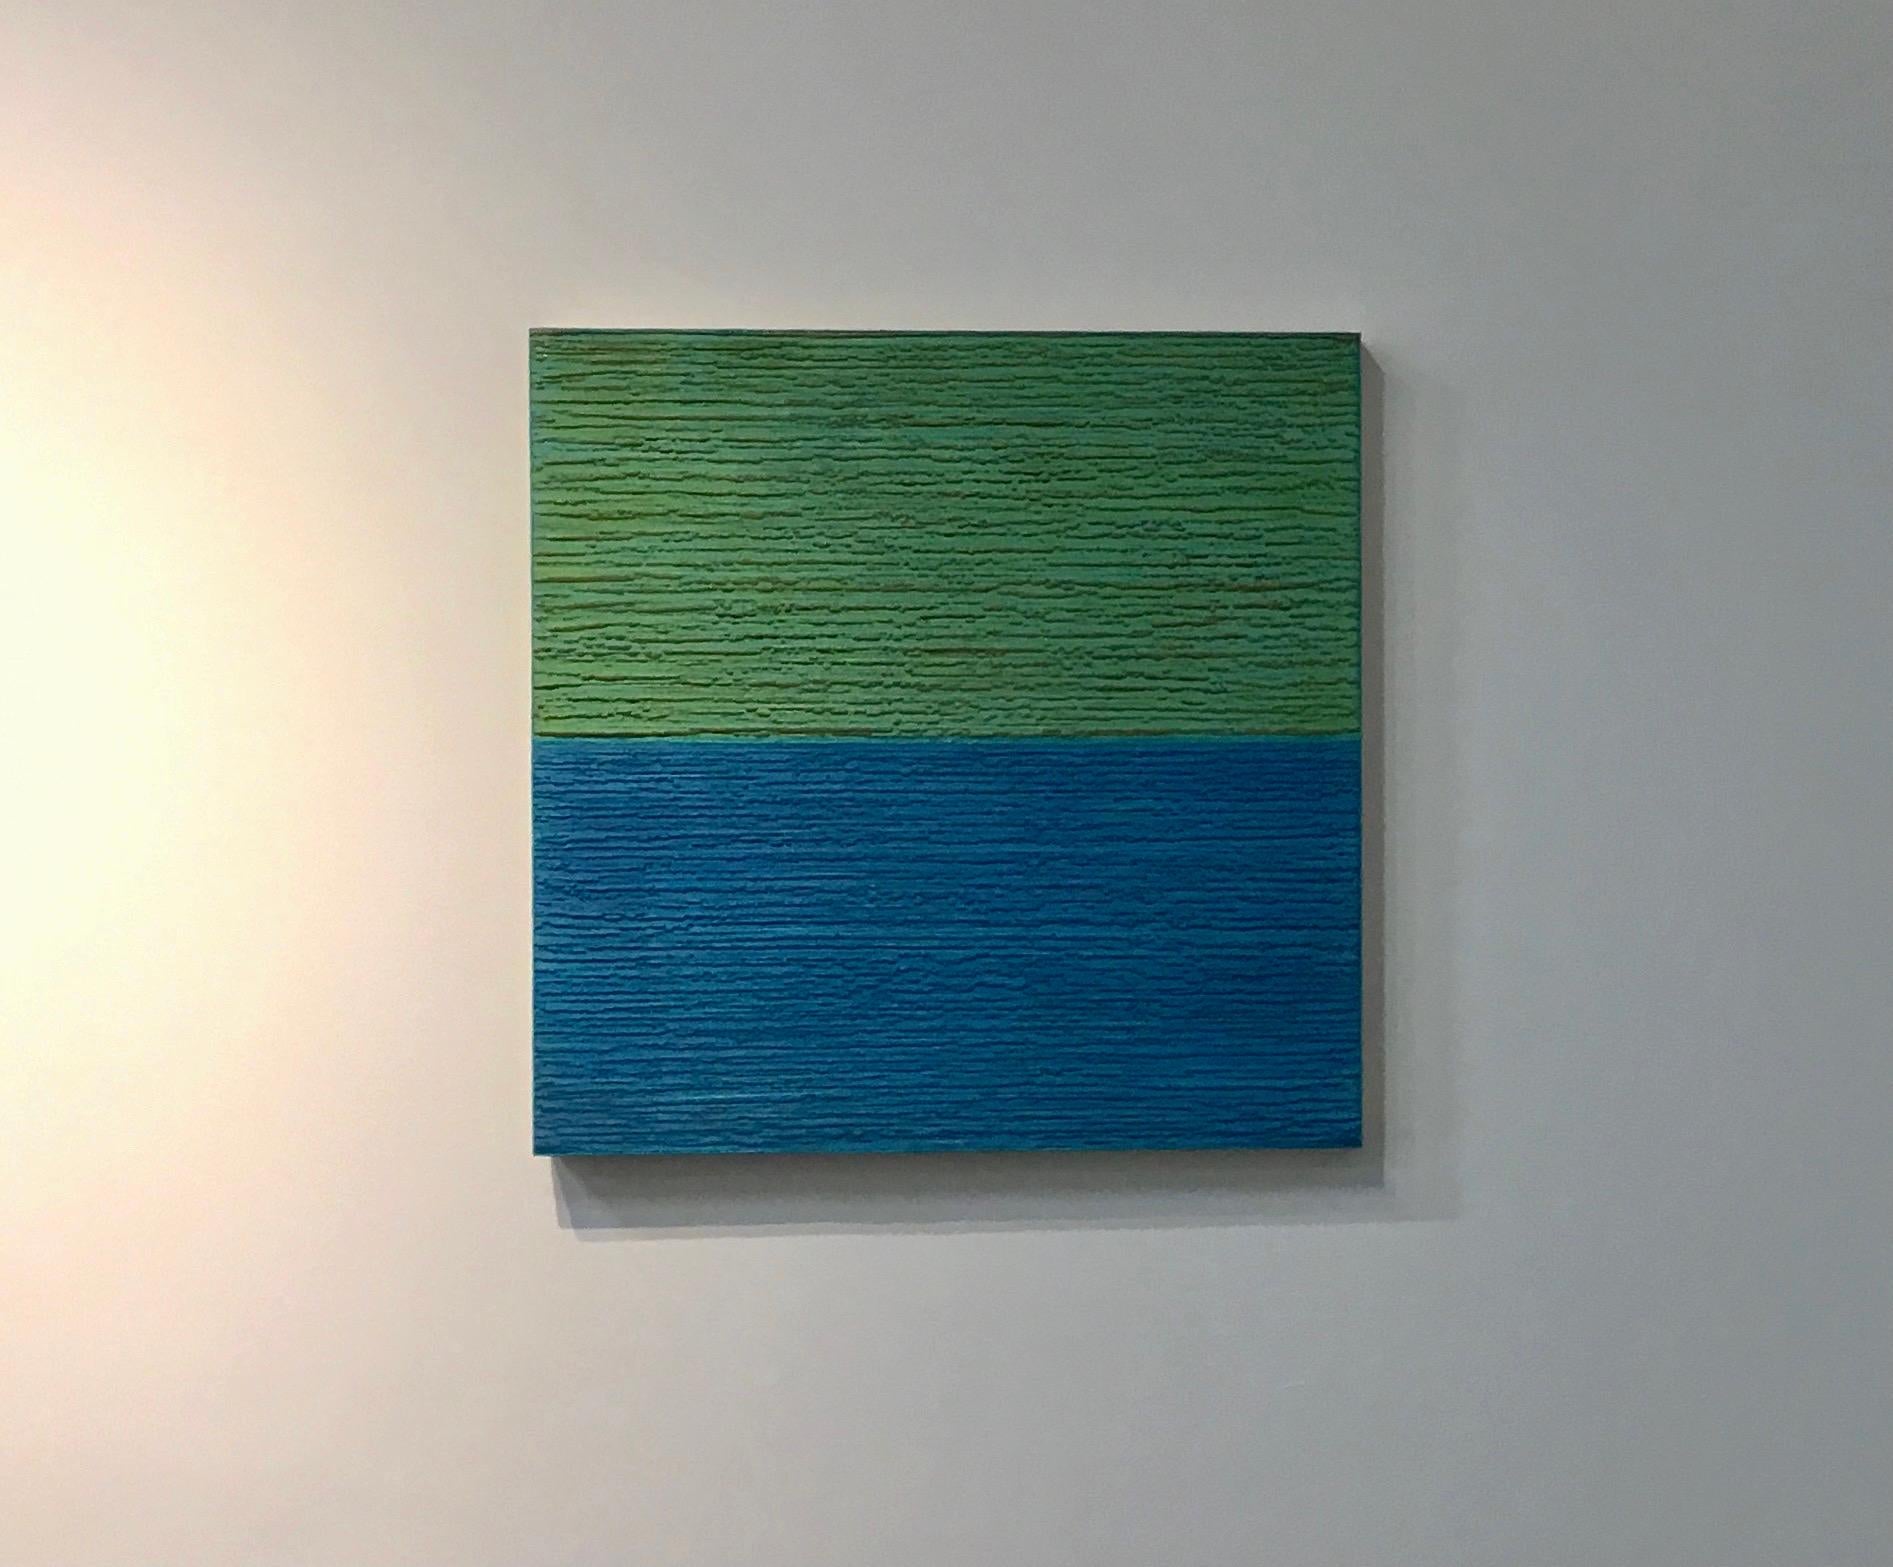 Vibrant mint green and sky blue encaustic (pigmented beeswax) painting accented with subtle gold and red details on birch panel. Signed, dated and titled on verso.

Joanne Mattera’s paintings can be described as lush minimalism, the work is